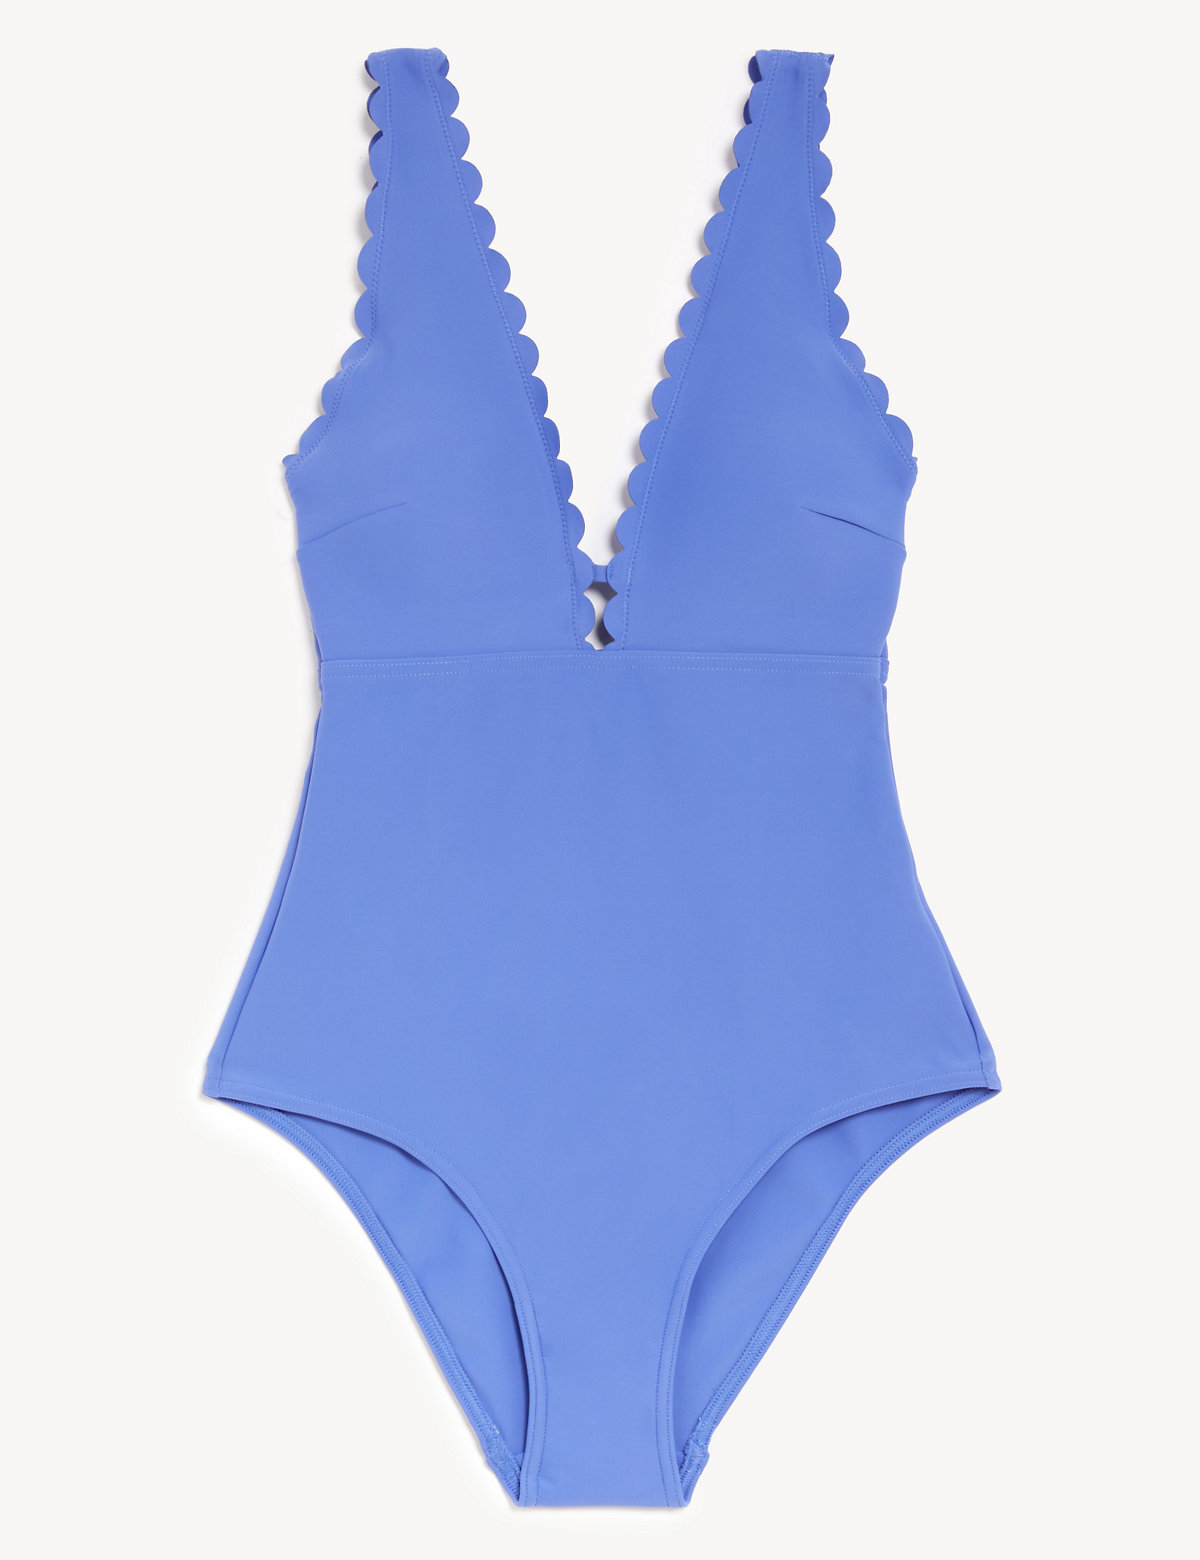 Padded Scallop Plunge Swimsuit